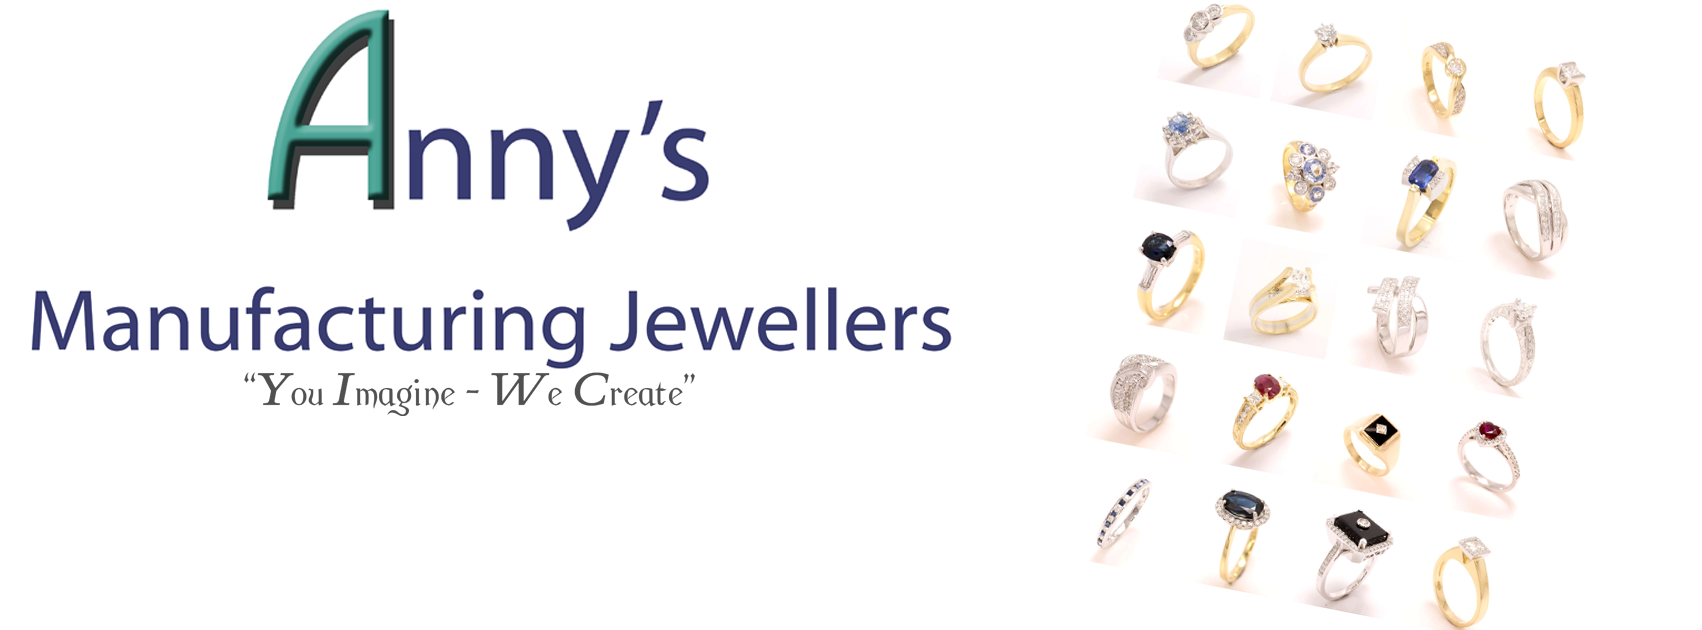 Anny's Manufacturing Jewellers